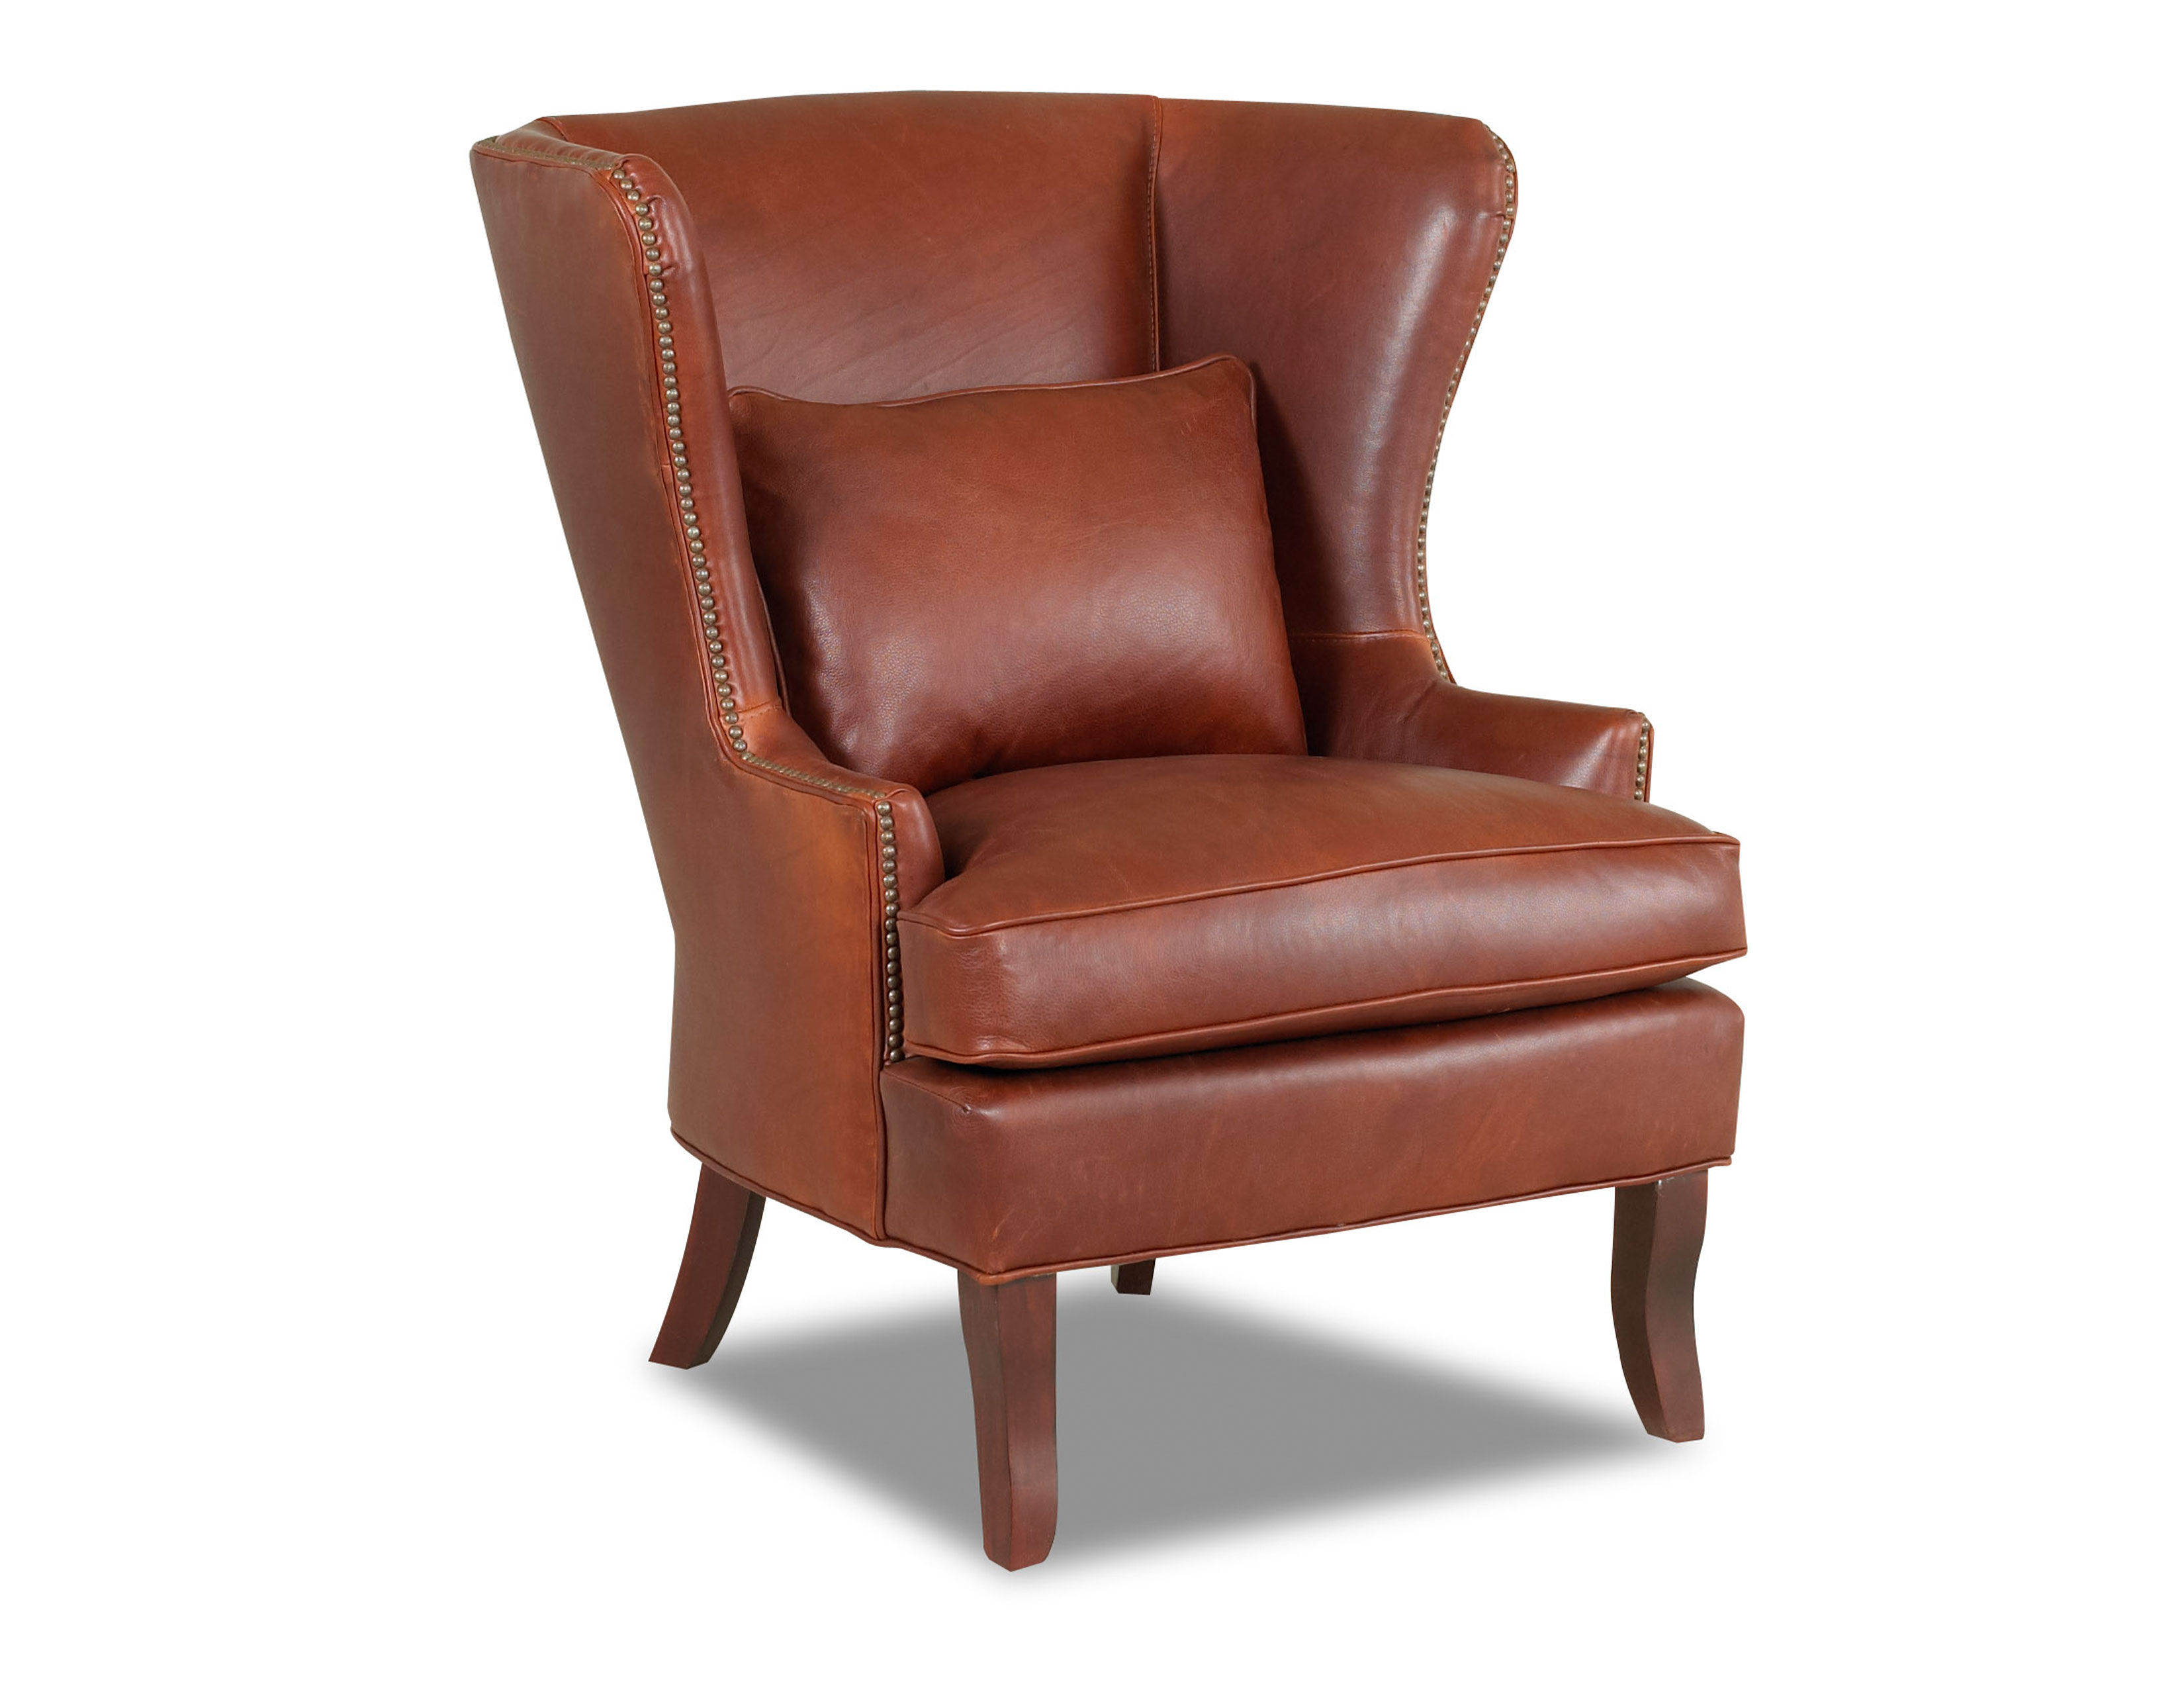 Krauss Leather Chair With Down Cushions, Klaussner Leather Chair